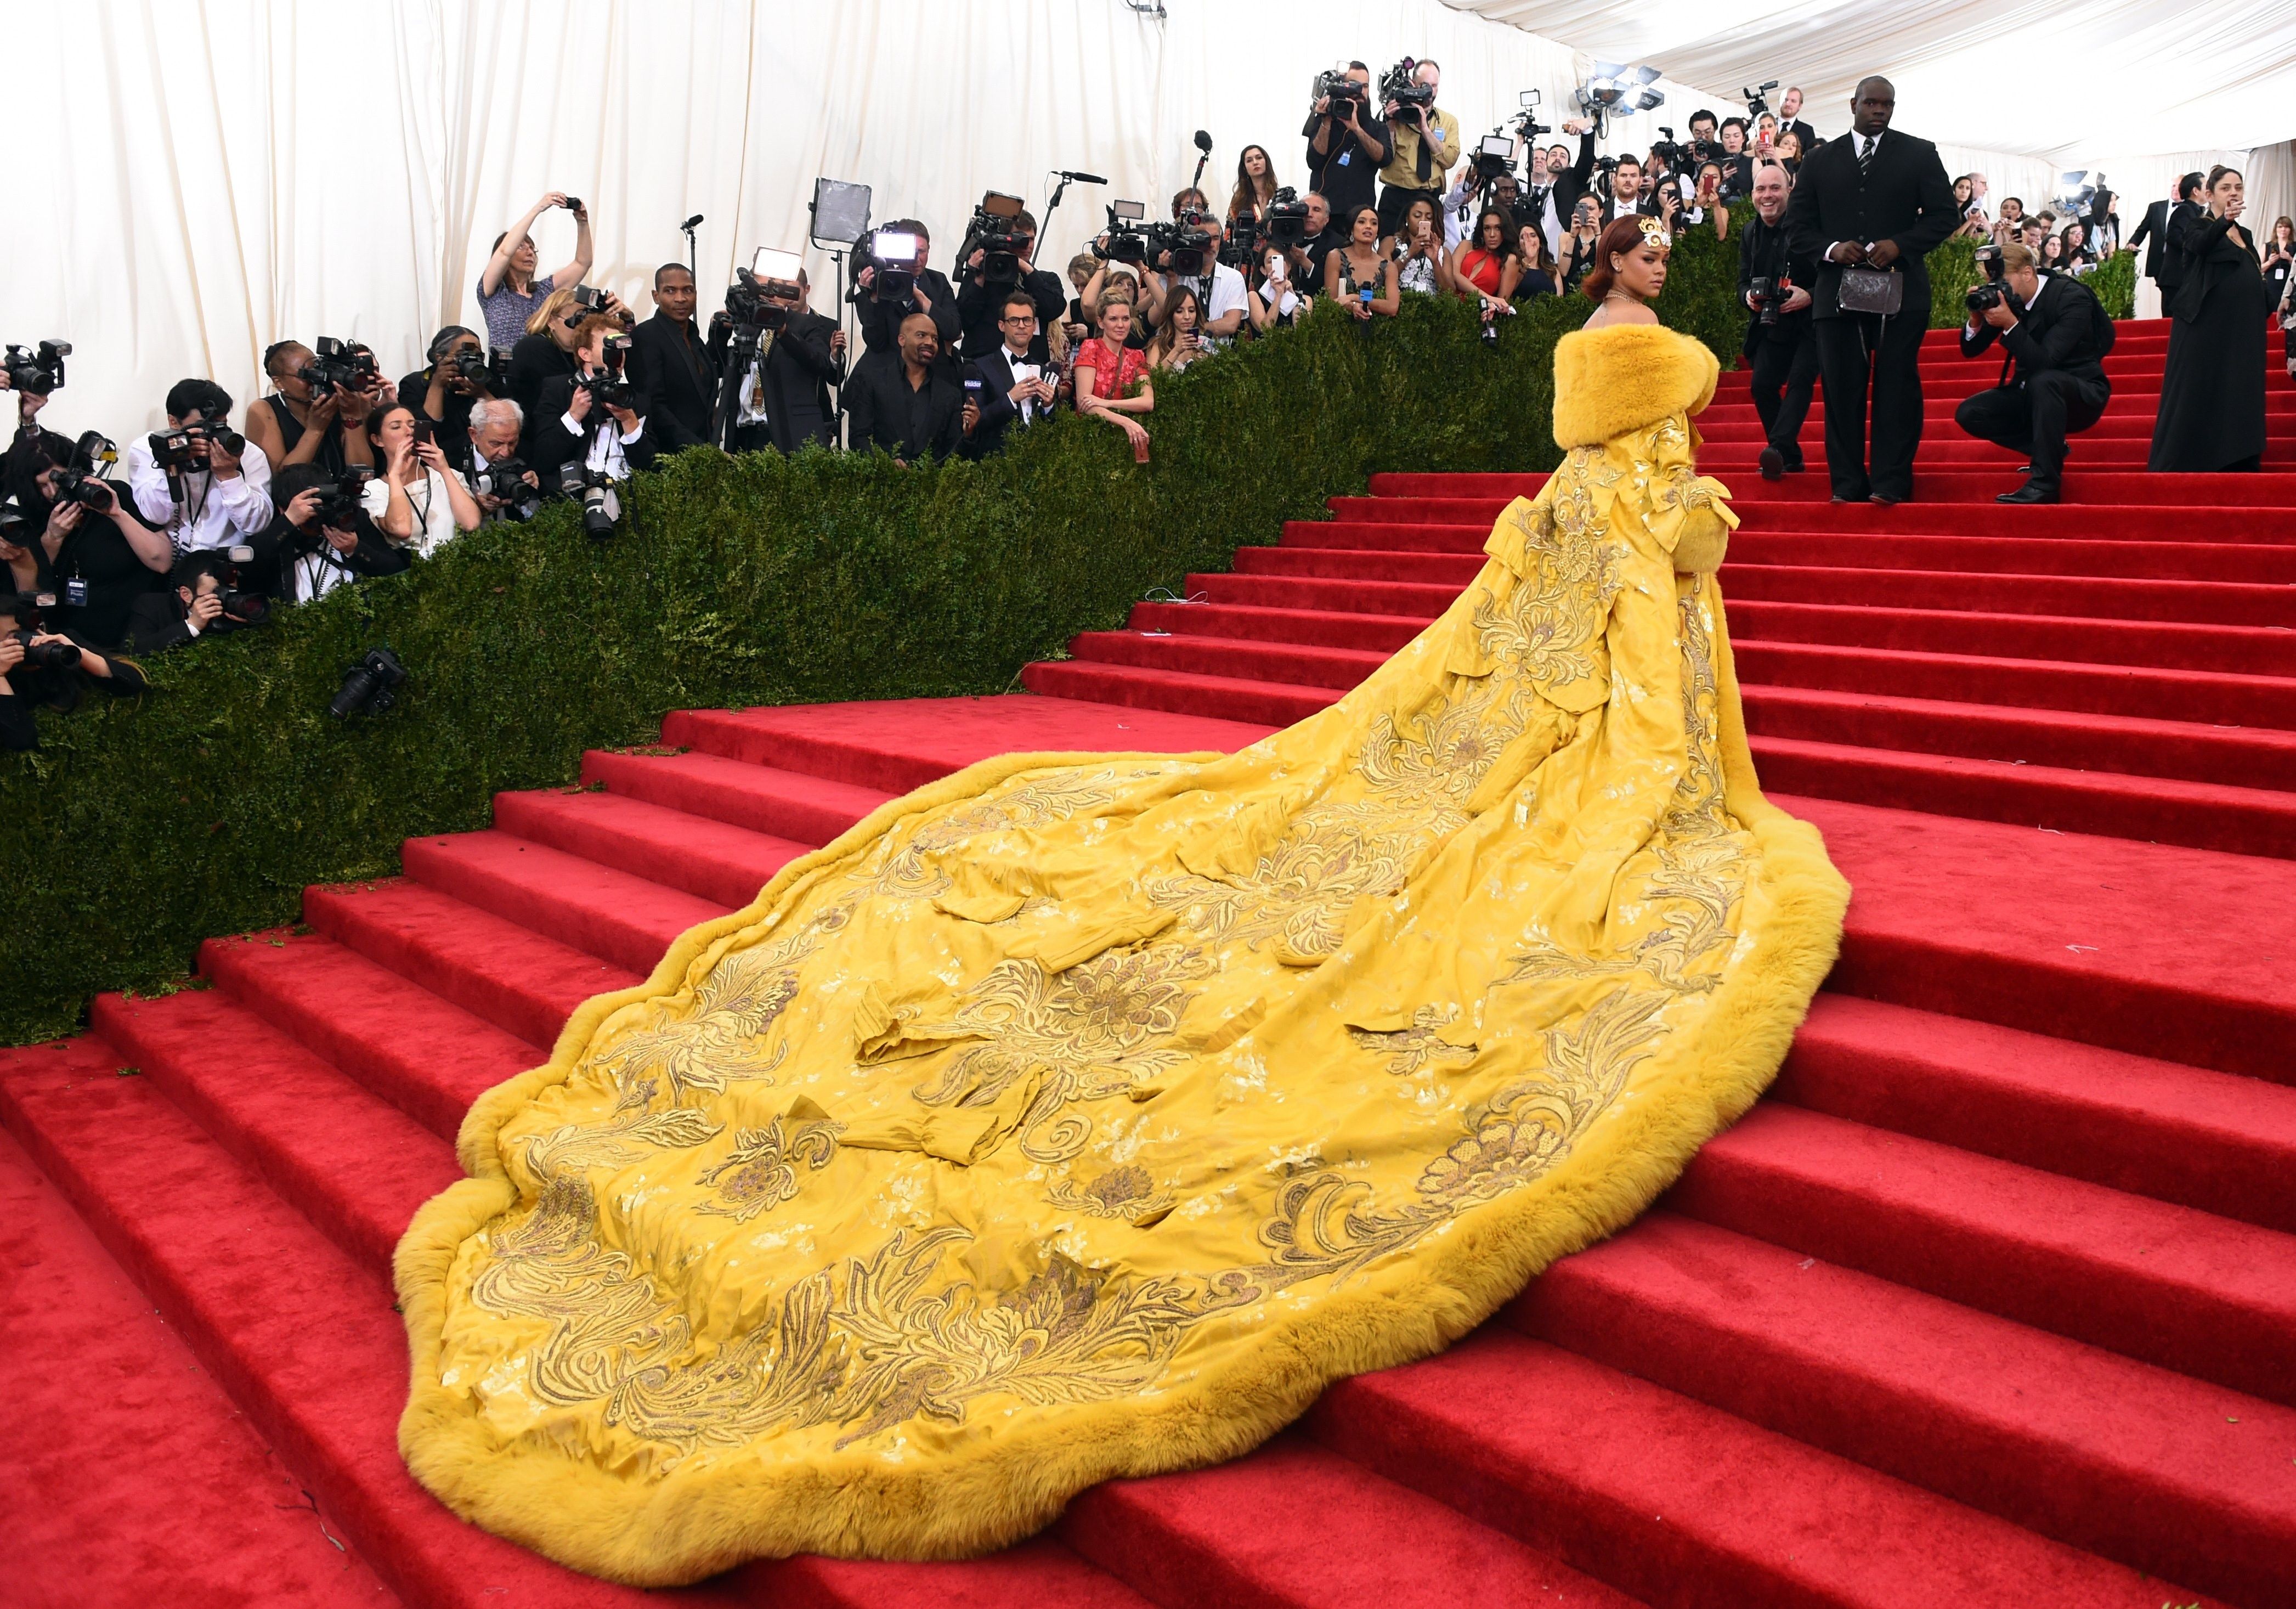 The Best Met Gala Dresses of All Time